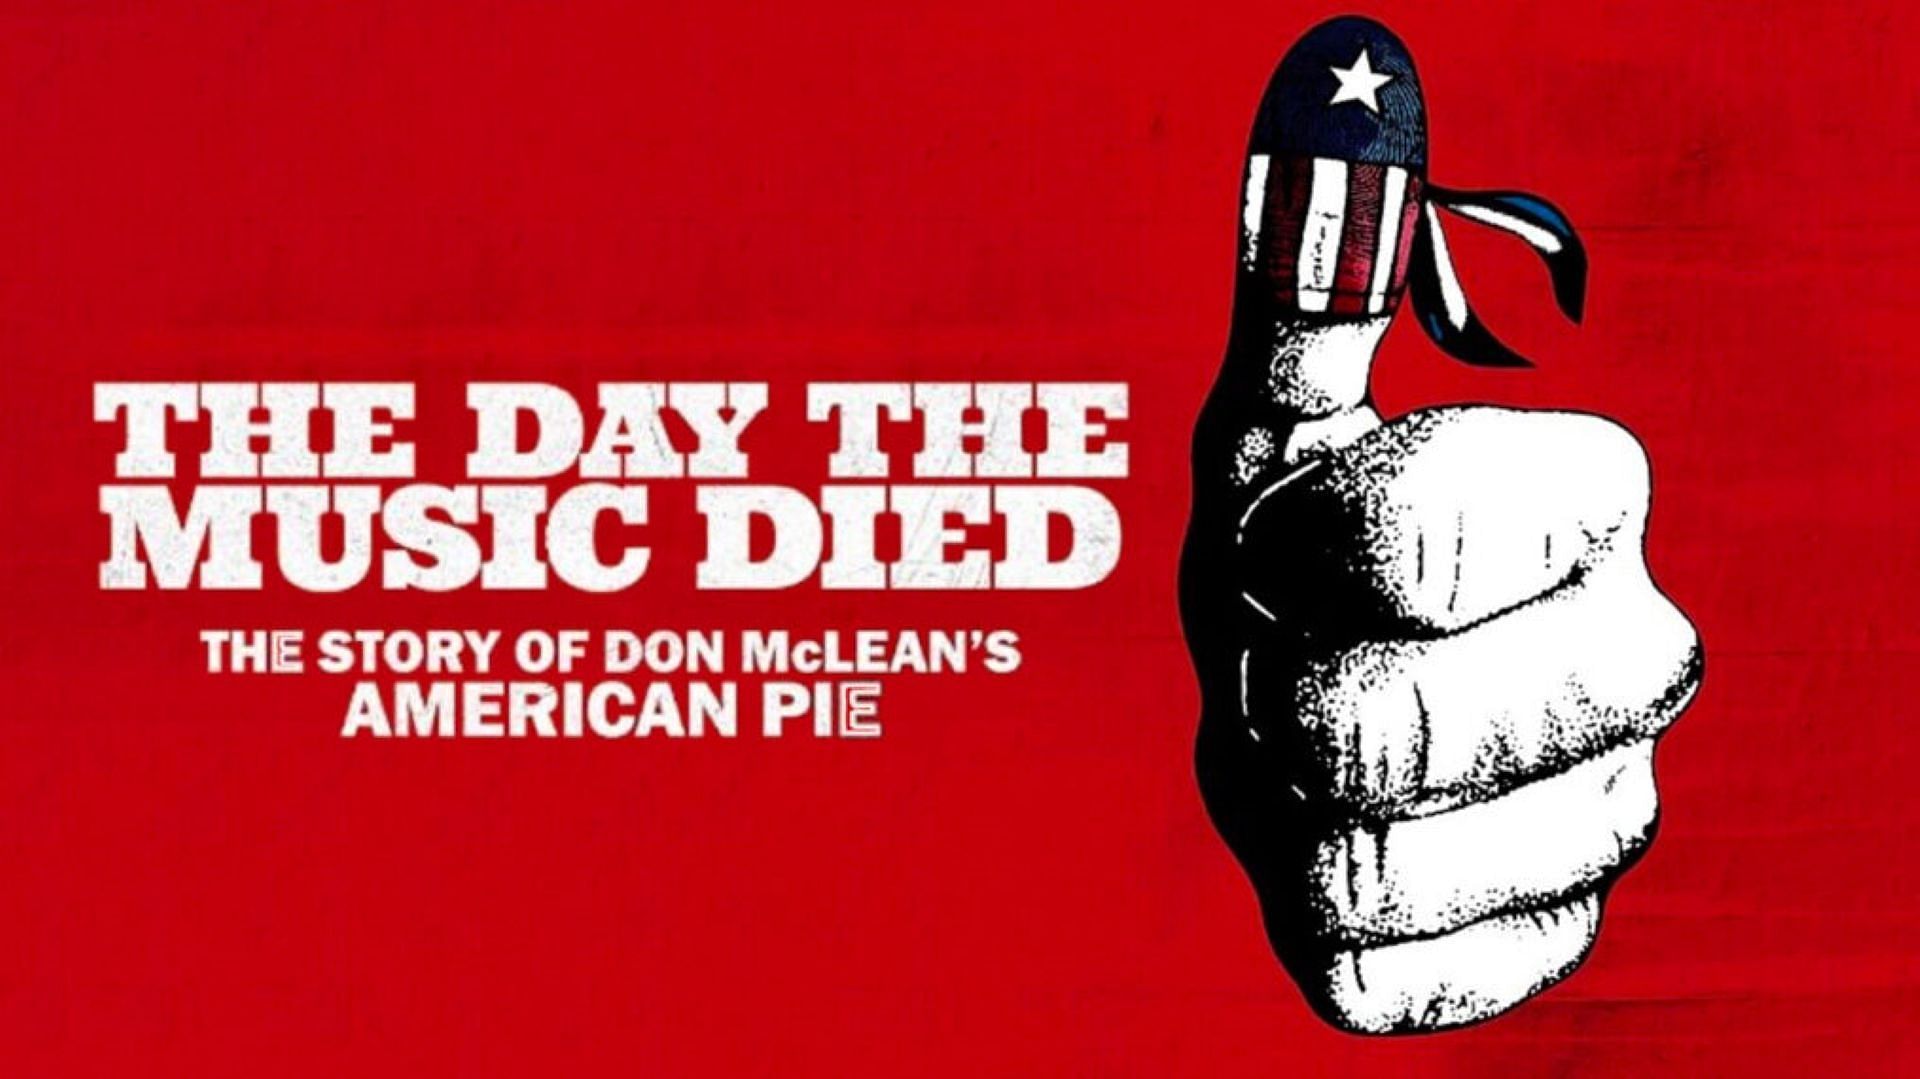 The official poster for The Day The Music Died (Image via Paramount)